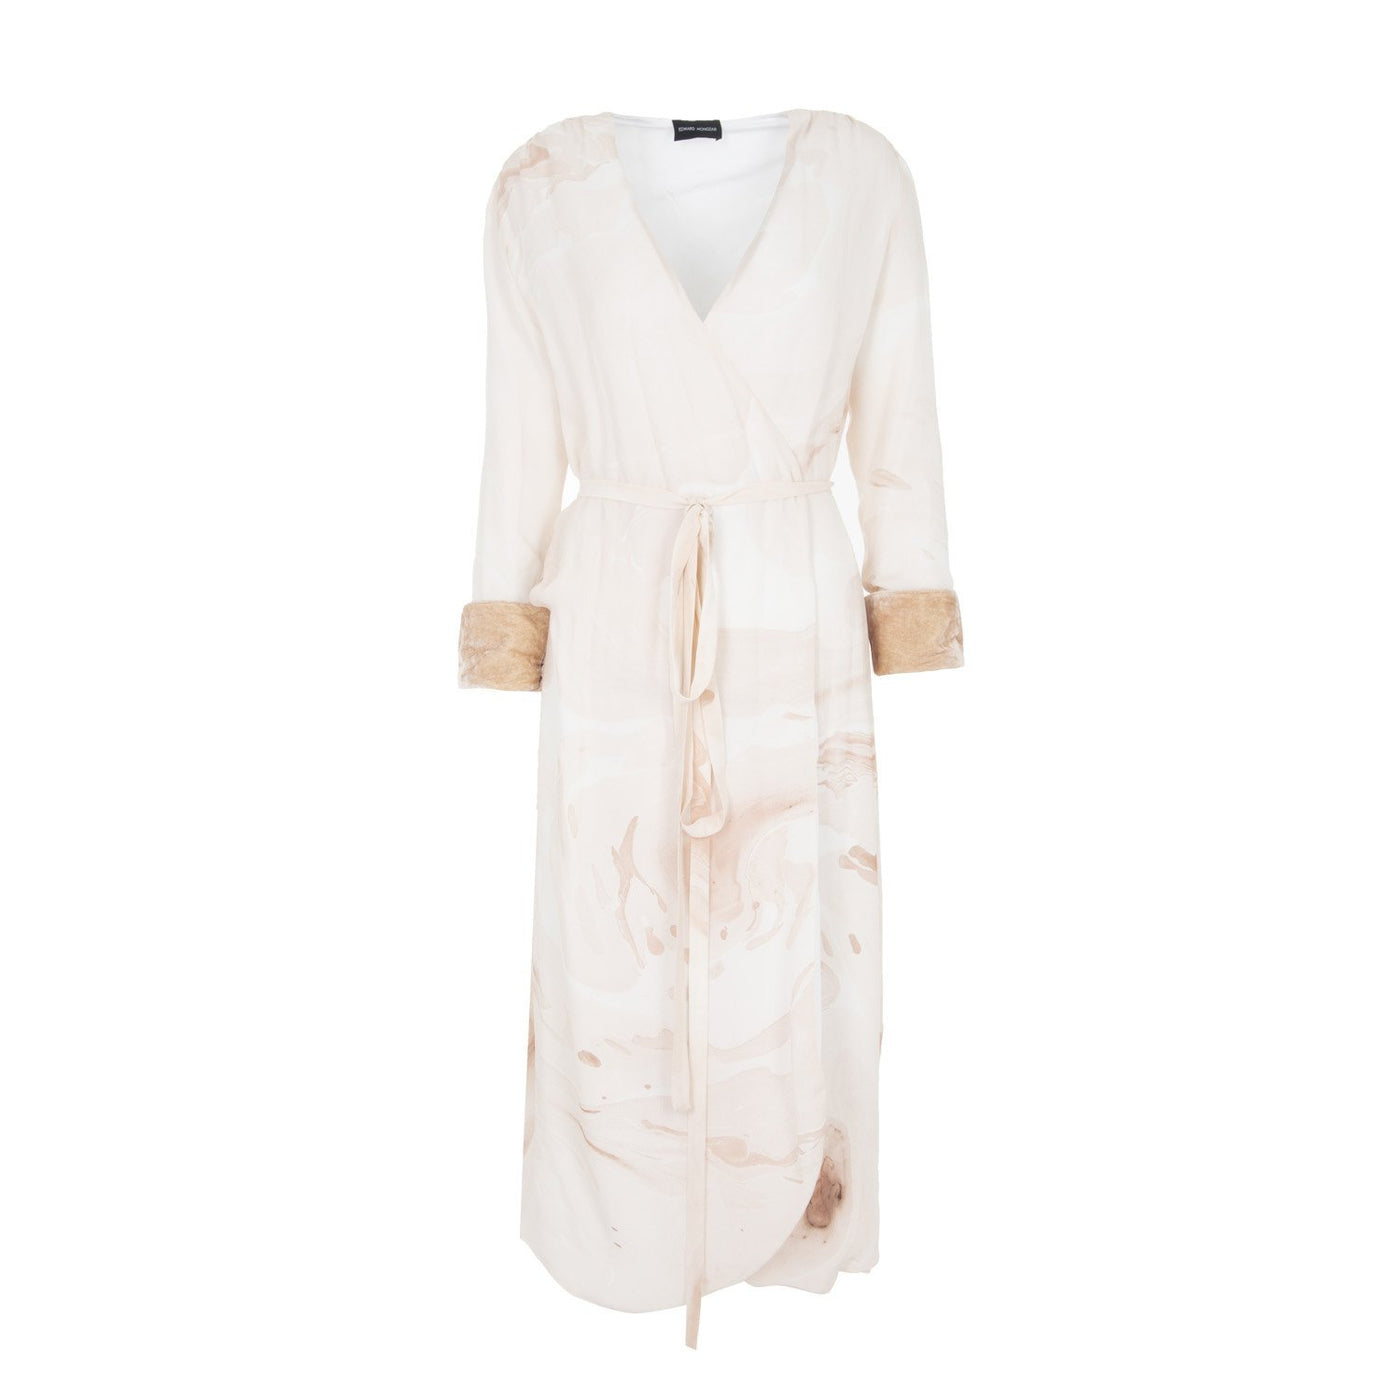 Marbled Wrap Around Dress - The Clothing LoungeEdward Mongzar